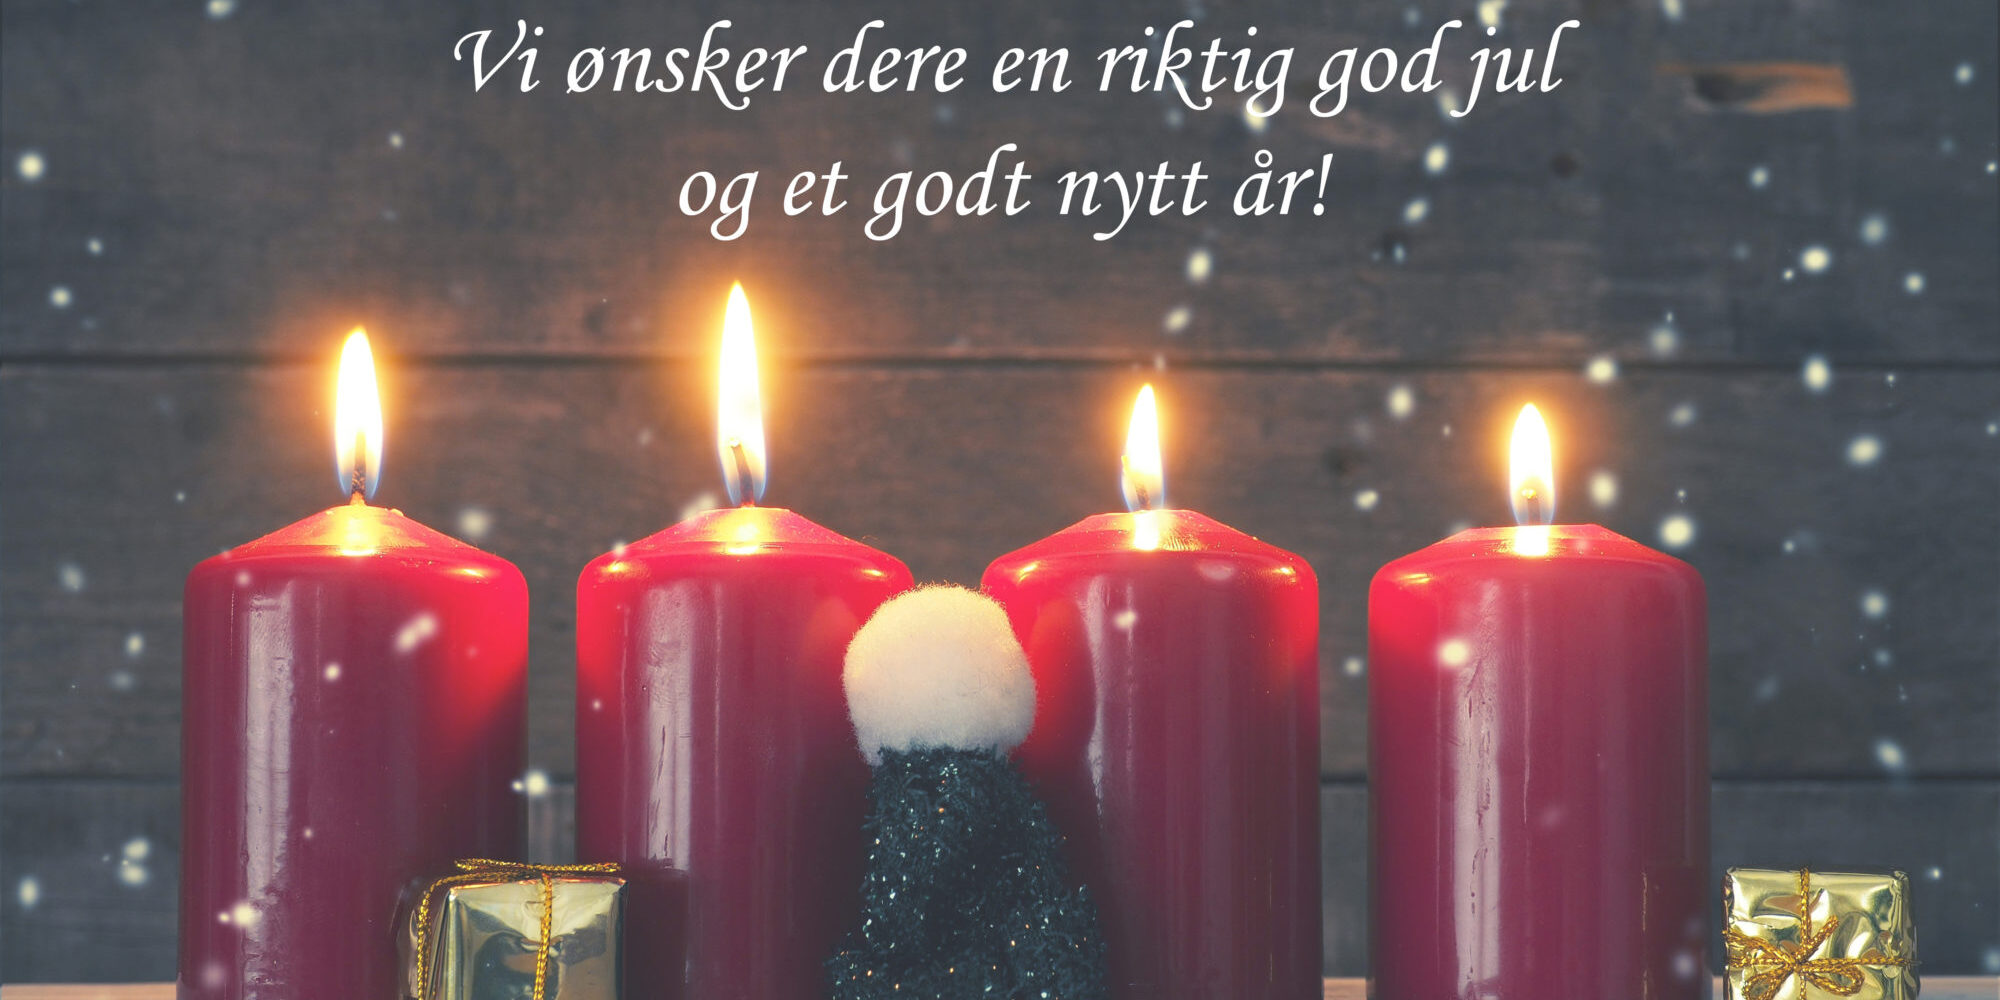 First Advent, Christmas or Advent background